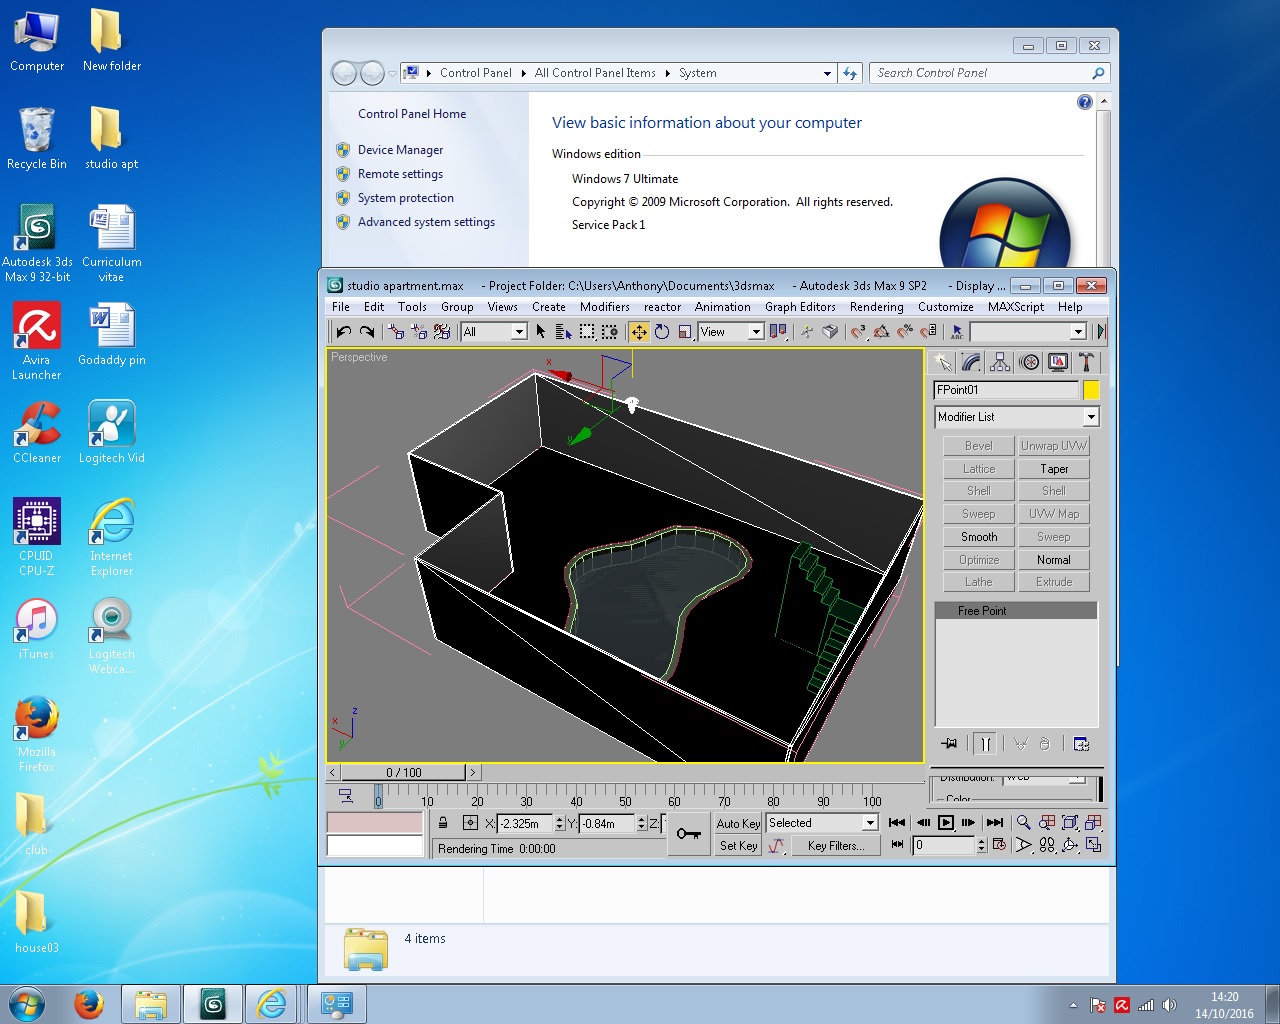 Solved: Running 3DS Max on windows 7 - Autodesk Community - 3ds Max